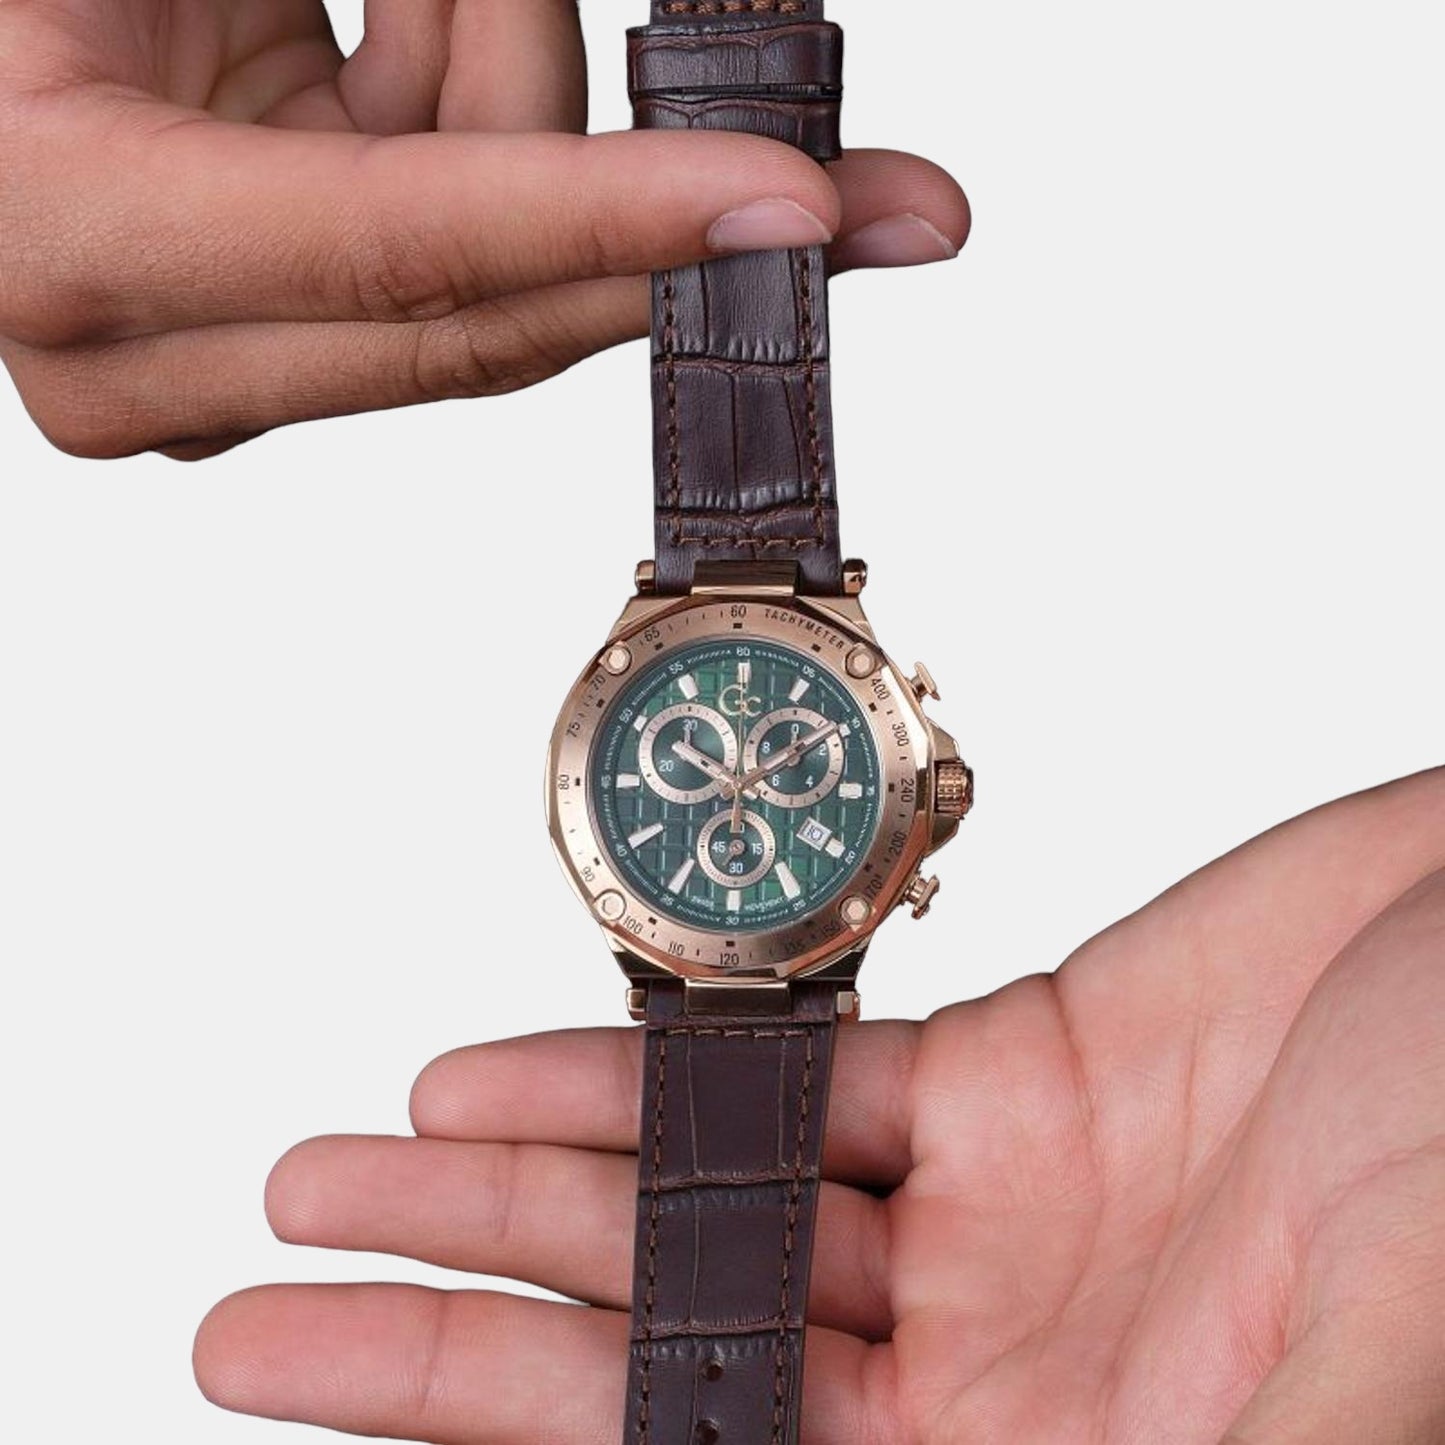 Male Green Leather Chronograph Watch Y81009G9MF